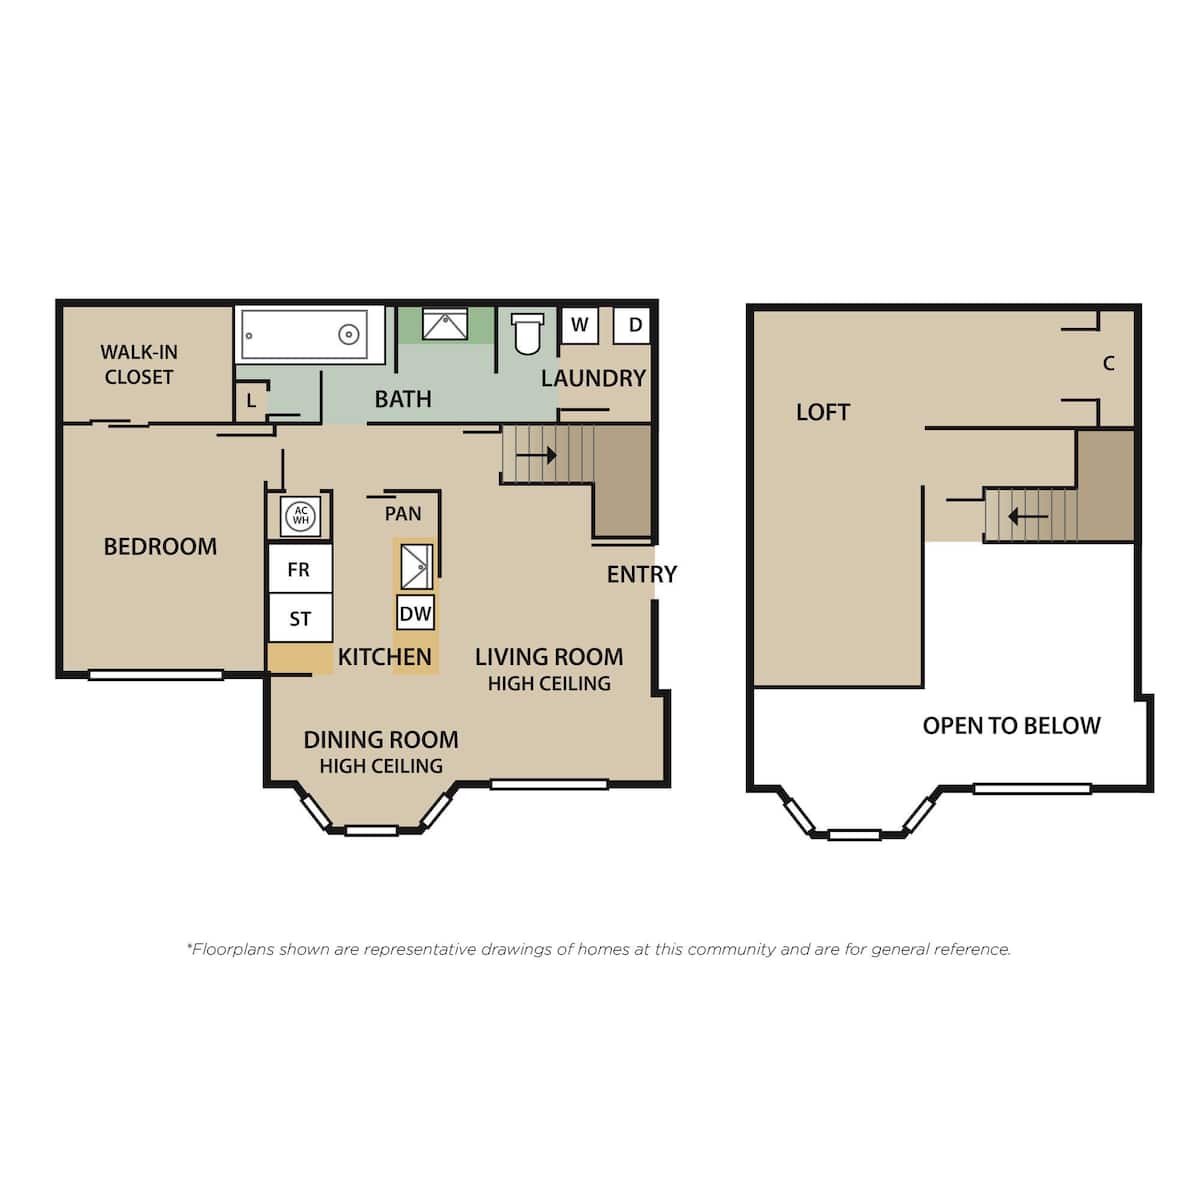 Floorplan diagram for SQUARE A10, showing 1 bedroom